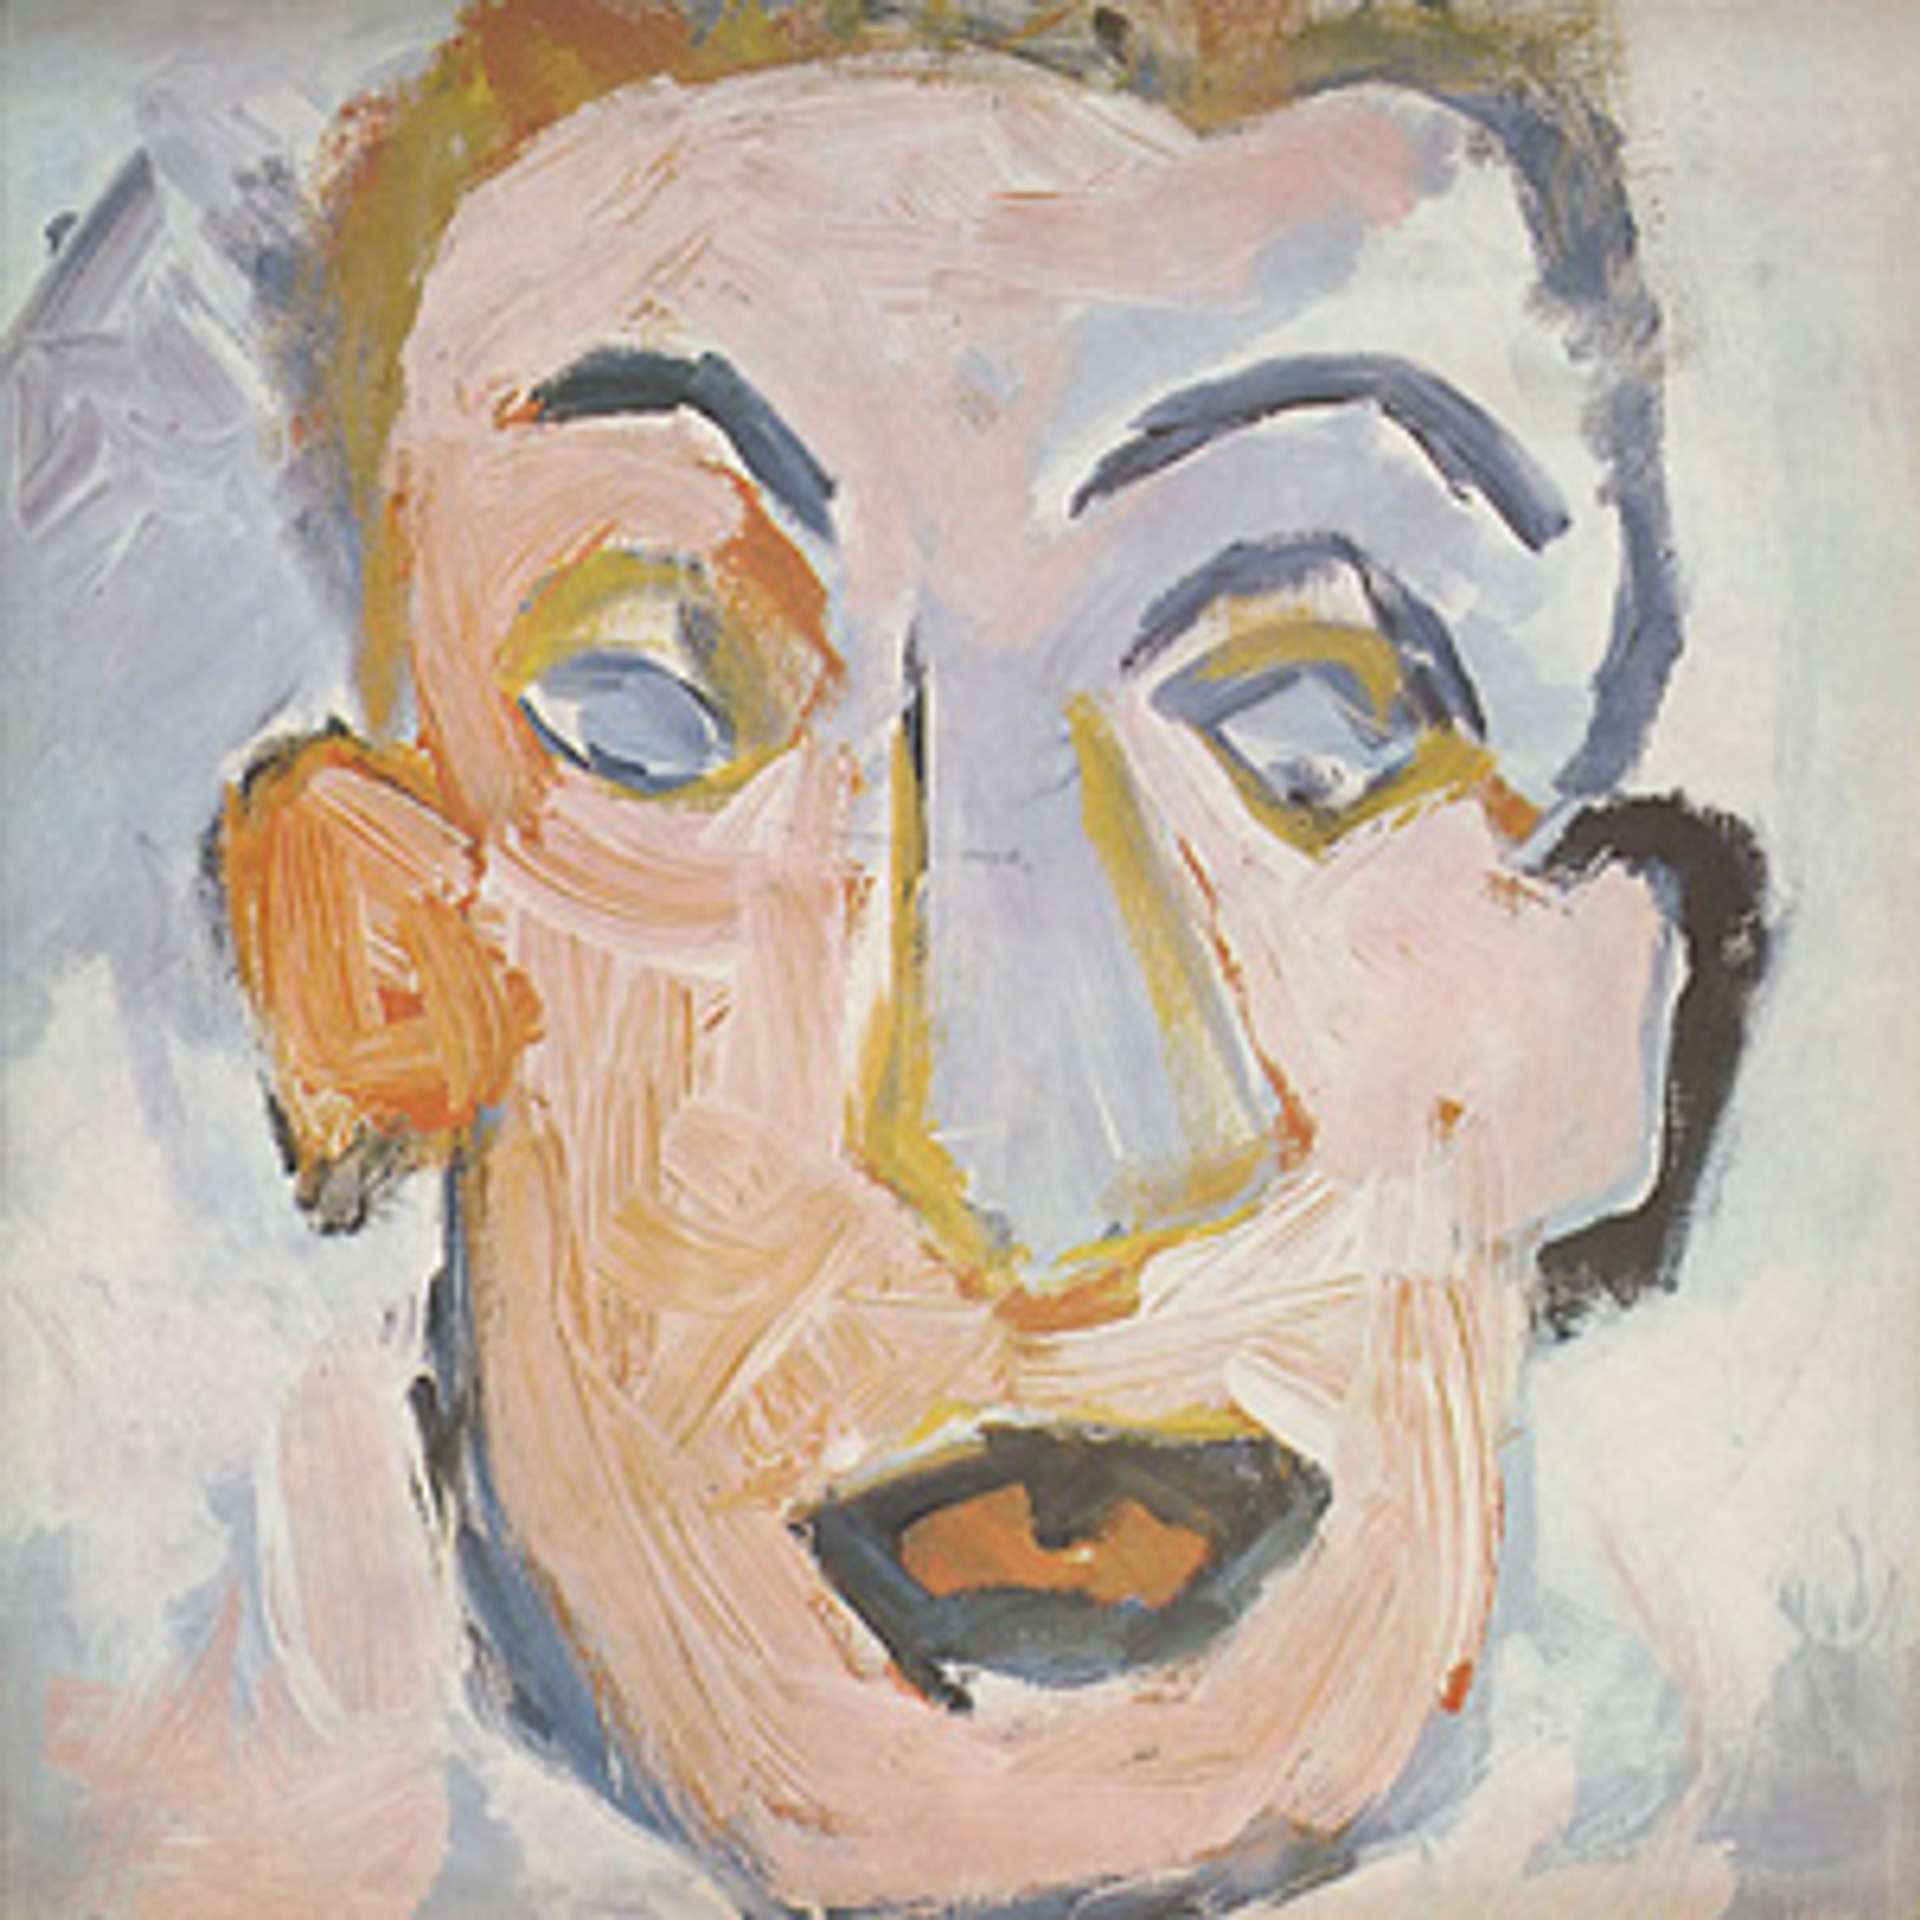 A close-up of a human face, a self portrait by artist Bob Dylan. The colour palette includes oranges, greys and purples.